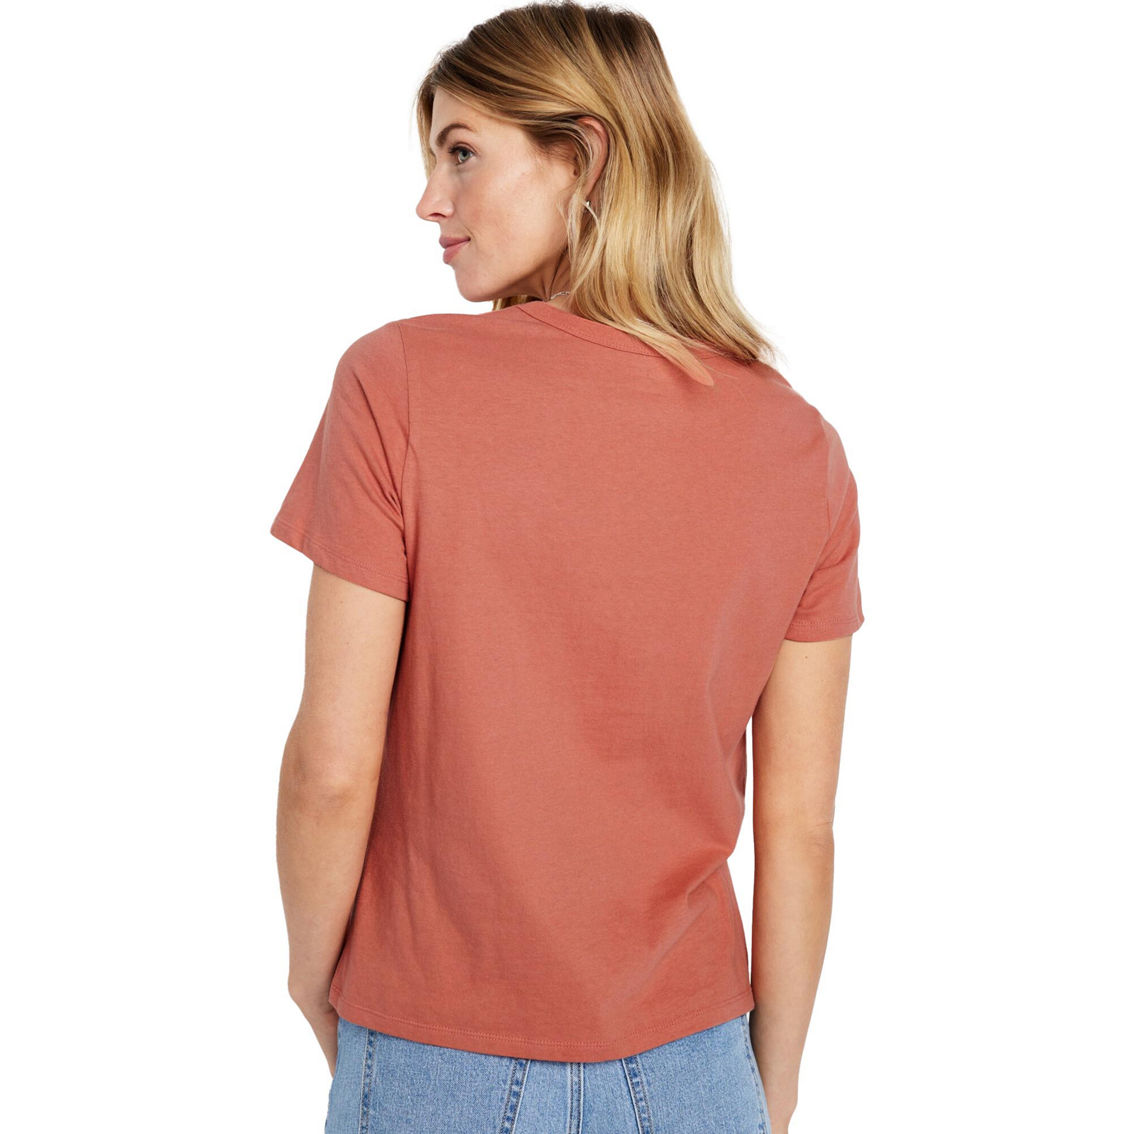 Old Navy EveryWear Graphic Jersey Tee - Image 2 of 2